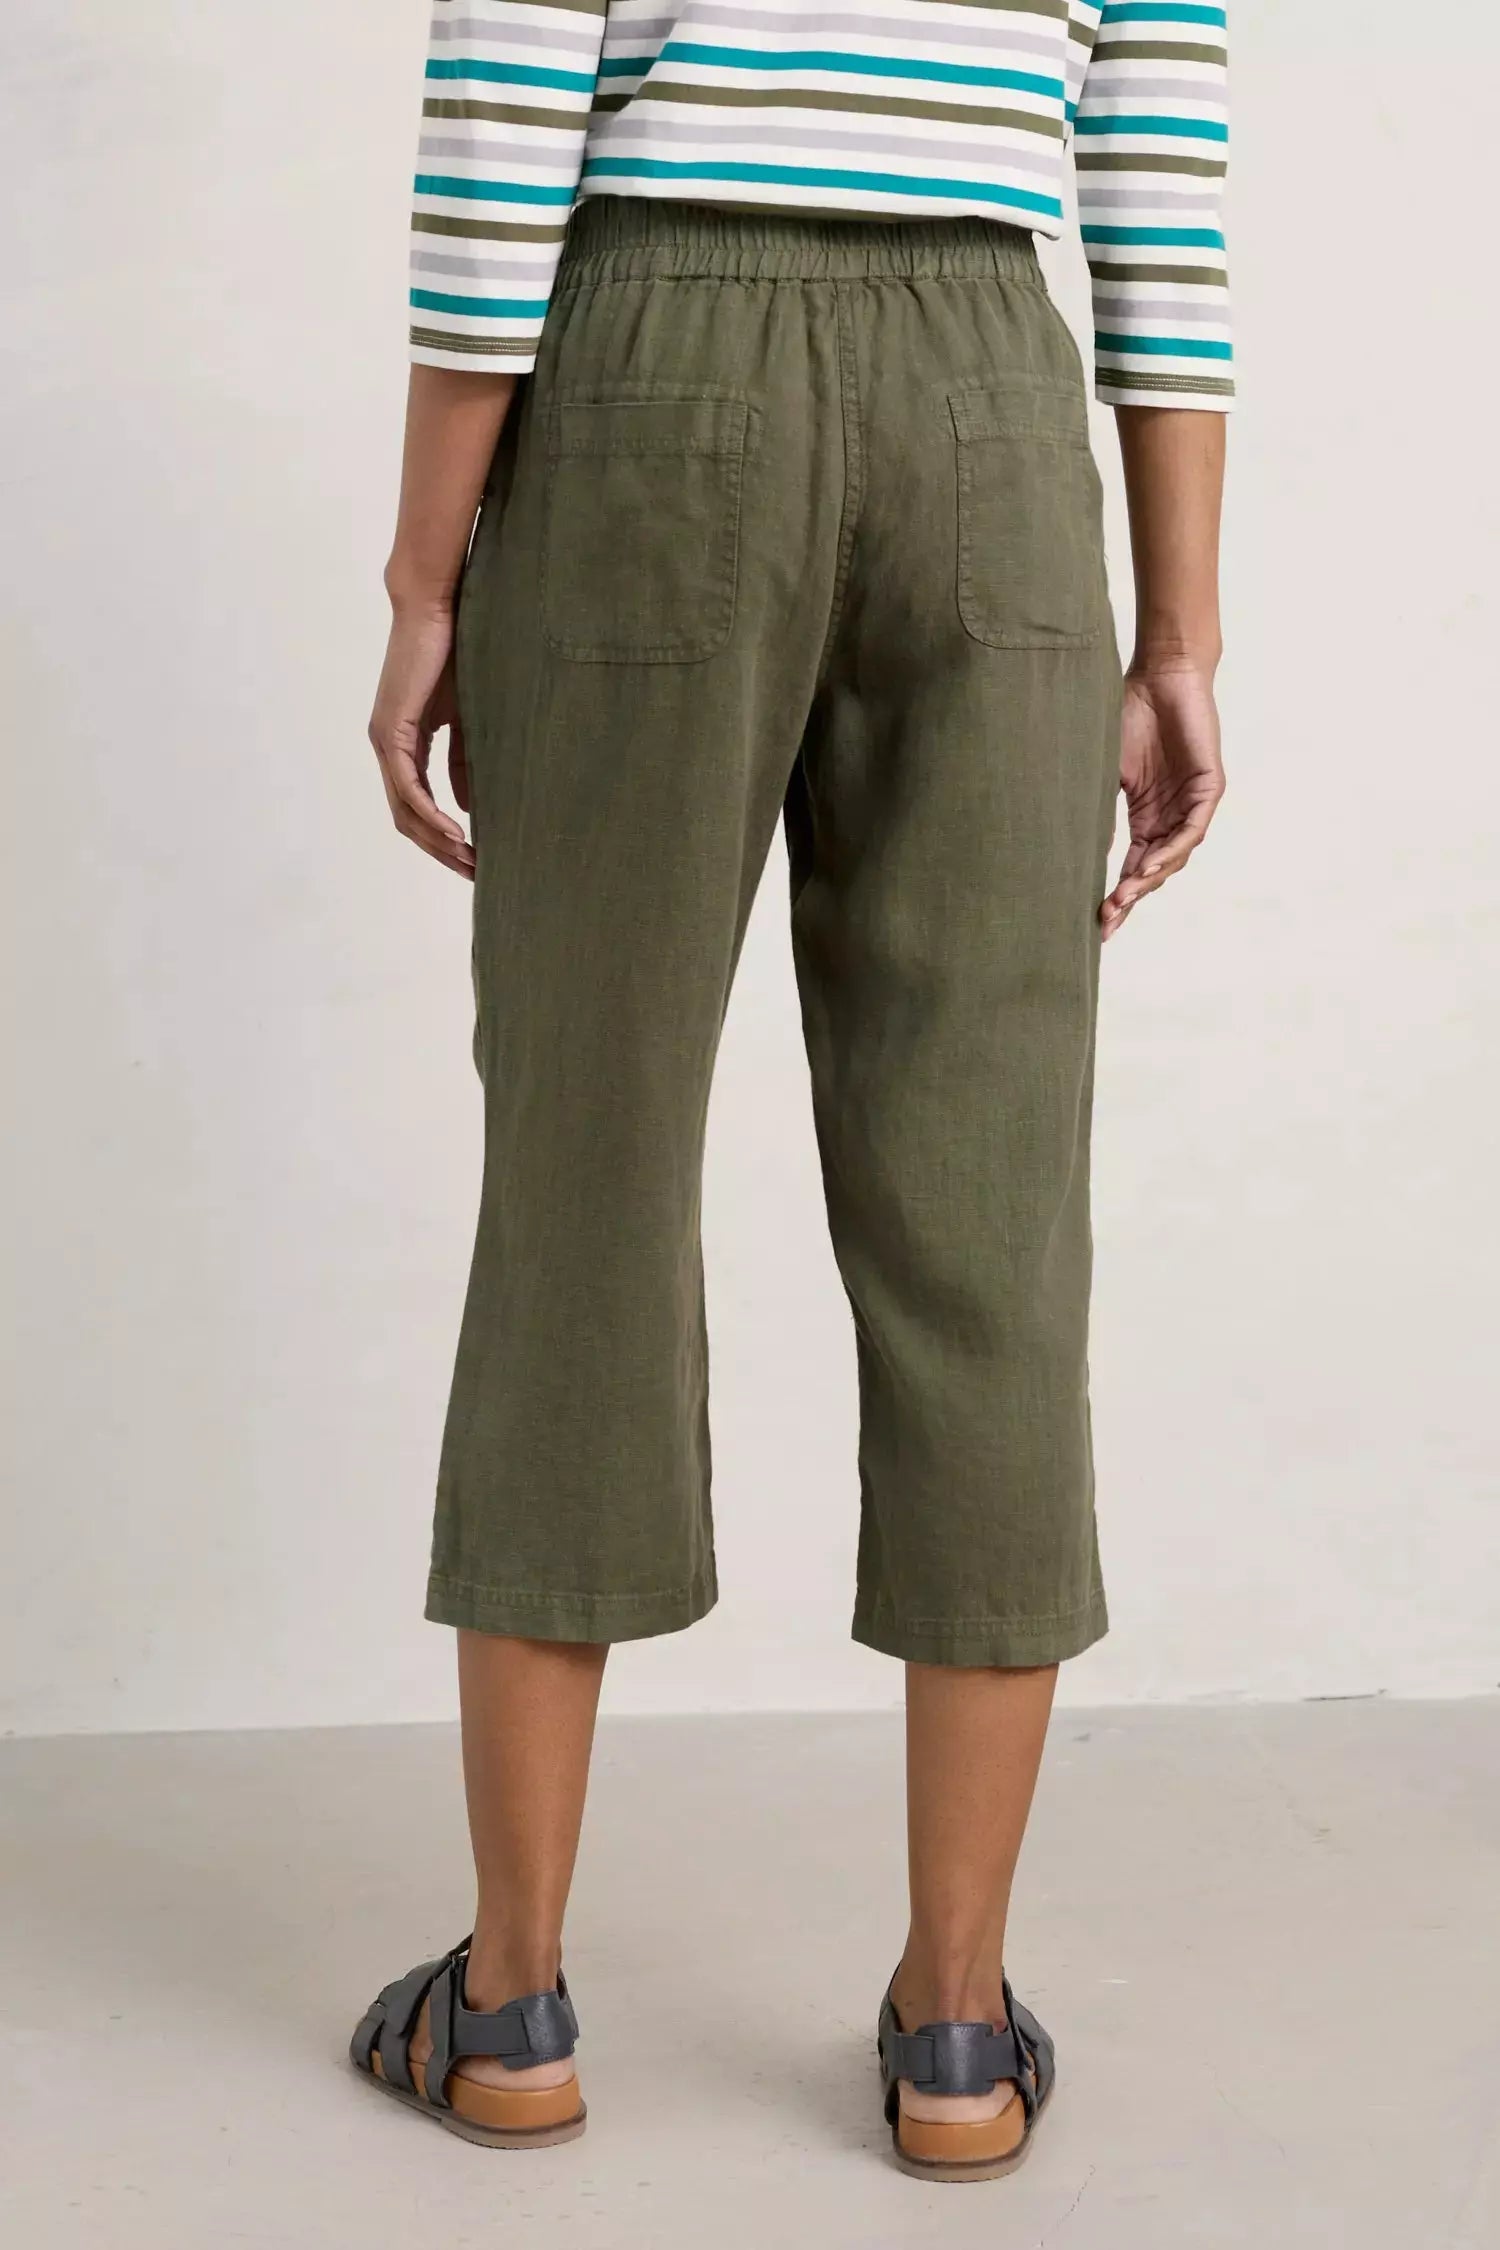 Cropped Trousers - Cropped Linen Trousers - Seasalt Cornwall